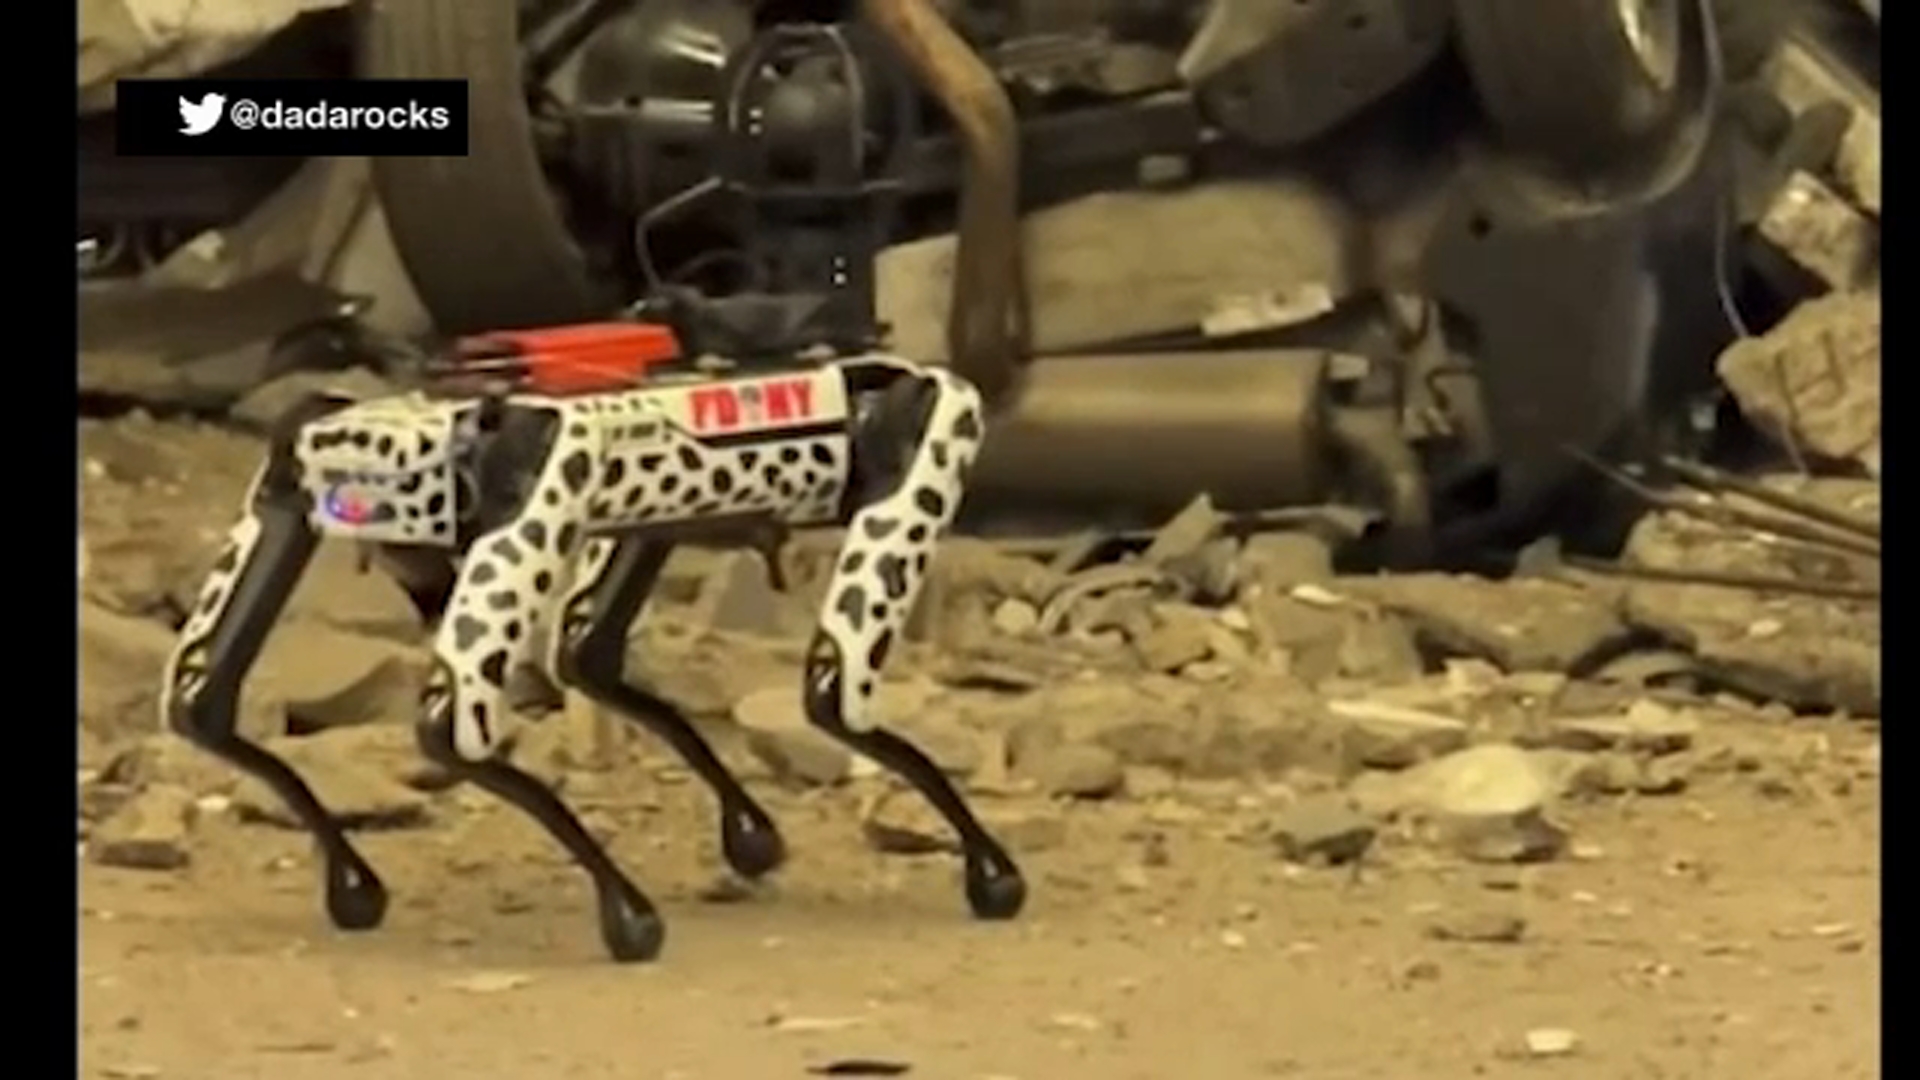 FDNY deployed robotic Dalmatian dog to survey unstable collapsed parking garage in Manhattan